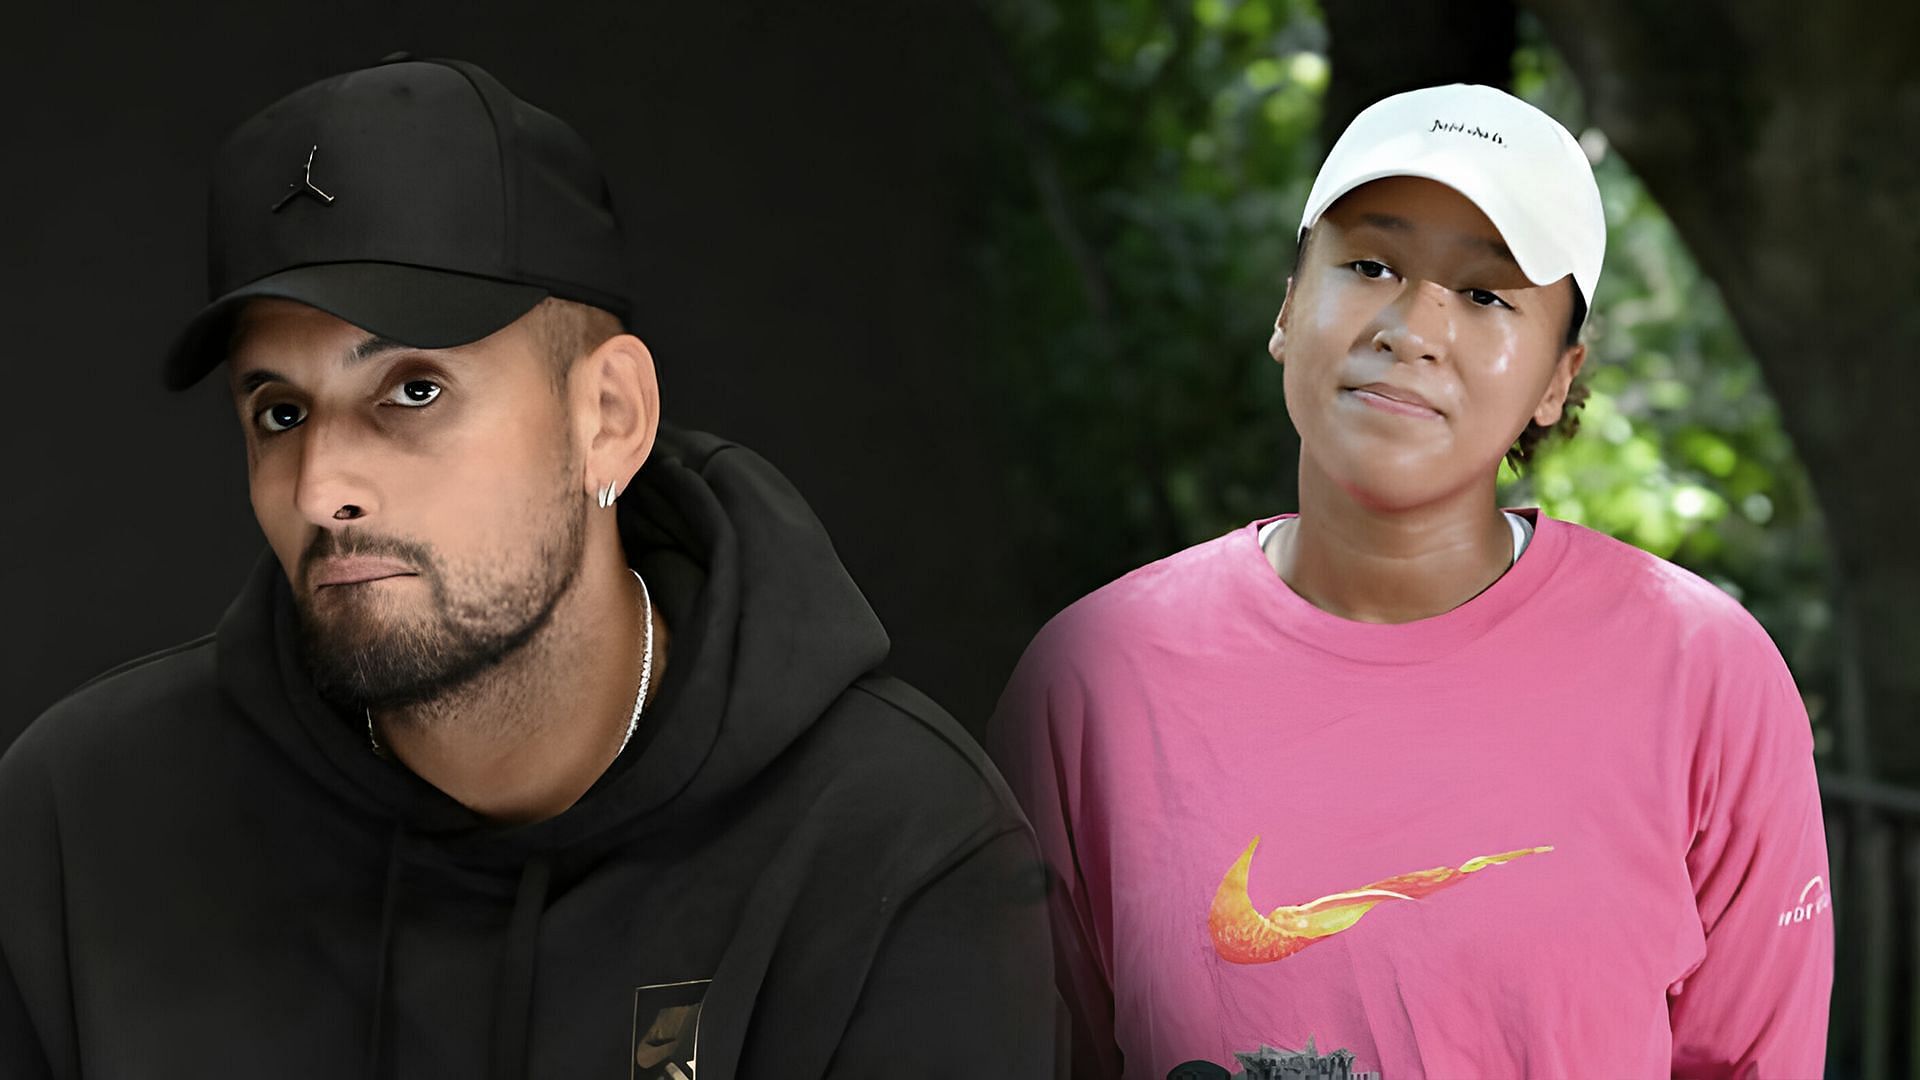 Nick Kyrgios has stated that Naomi Osaka played an important role in the way he dealt with his mental health issues.